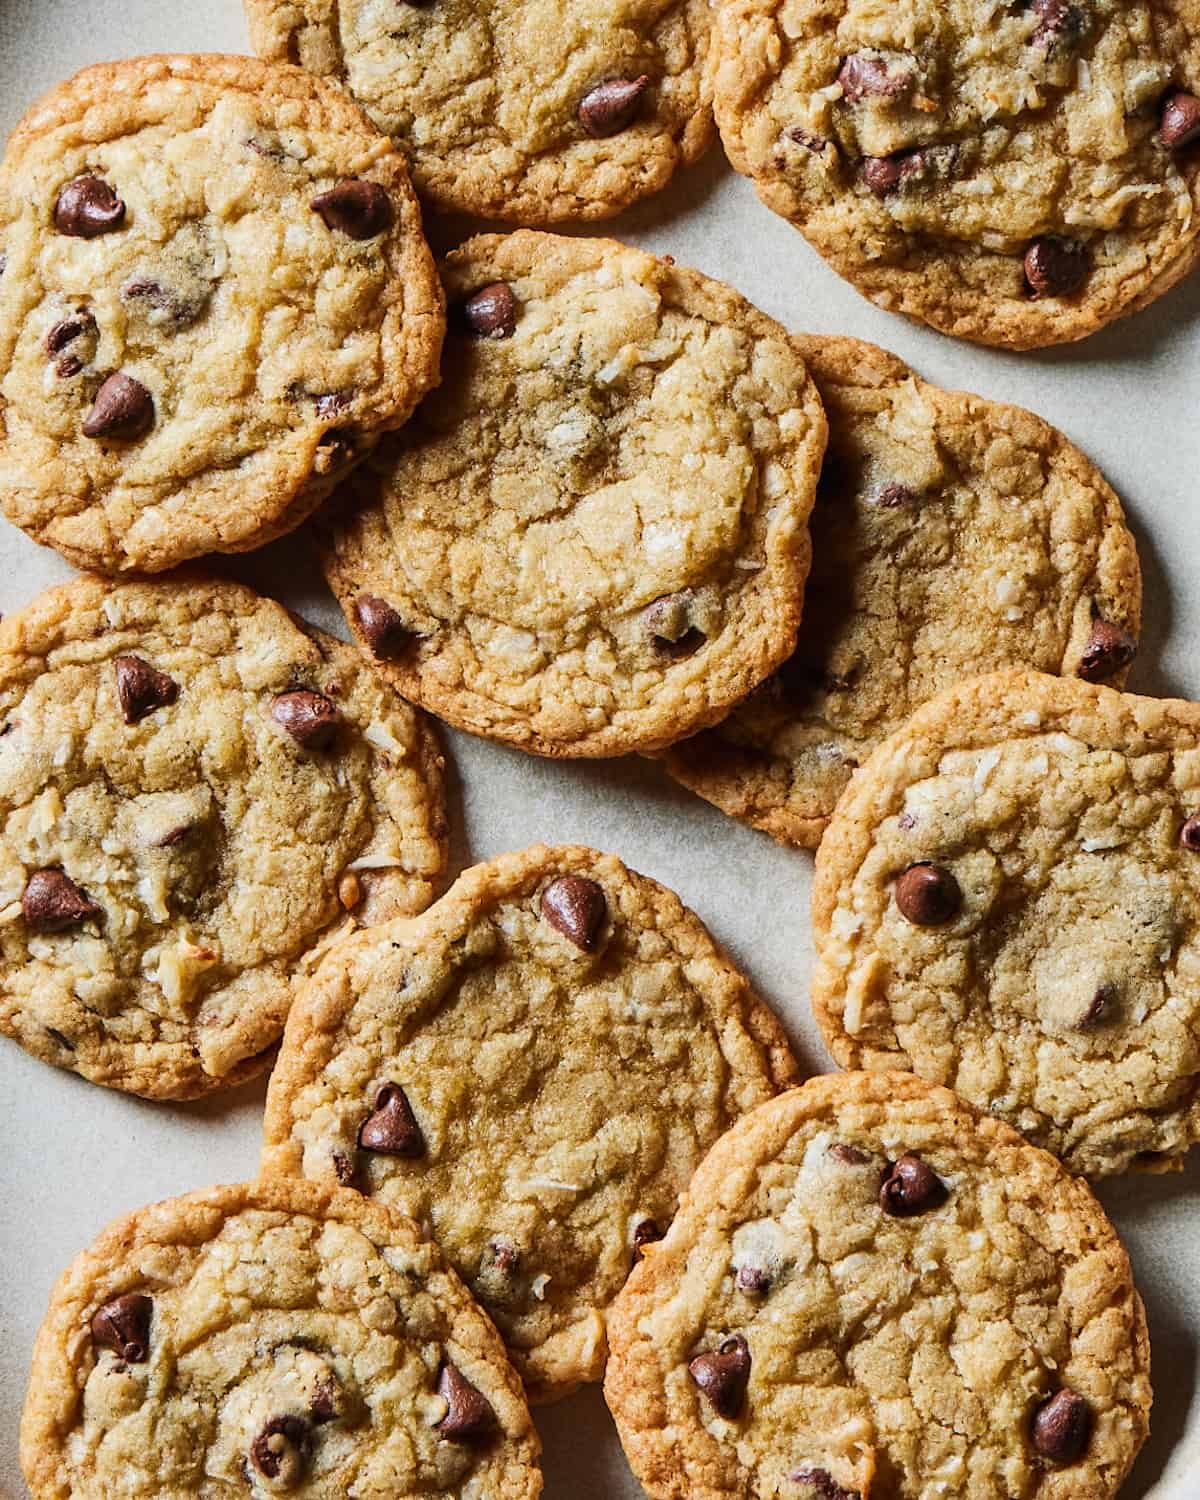 Coconut Chocolate Chip Cookies from www.whatsgabycooking.com (@whatsgabycookin)